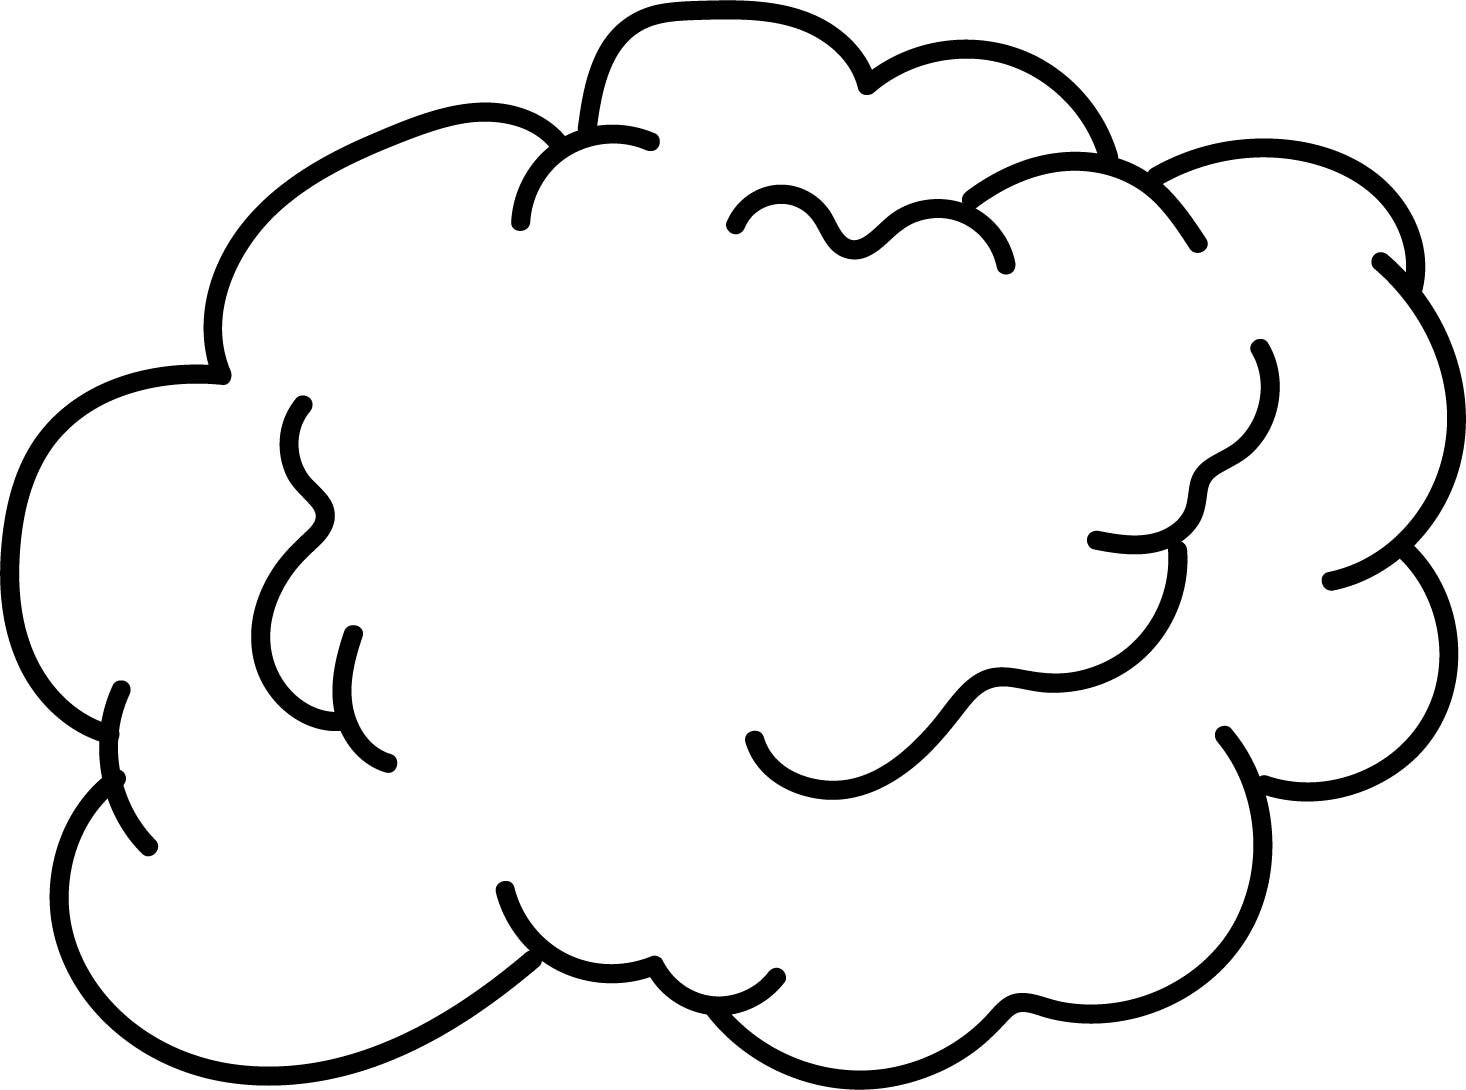 6 Best Images of Free Printable Cloud Template Large Cloud Coloring